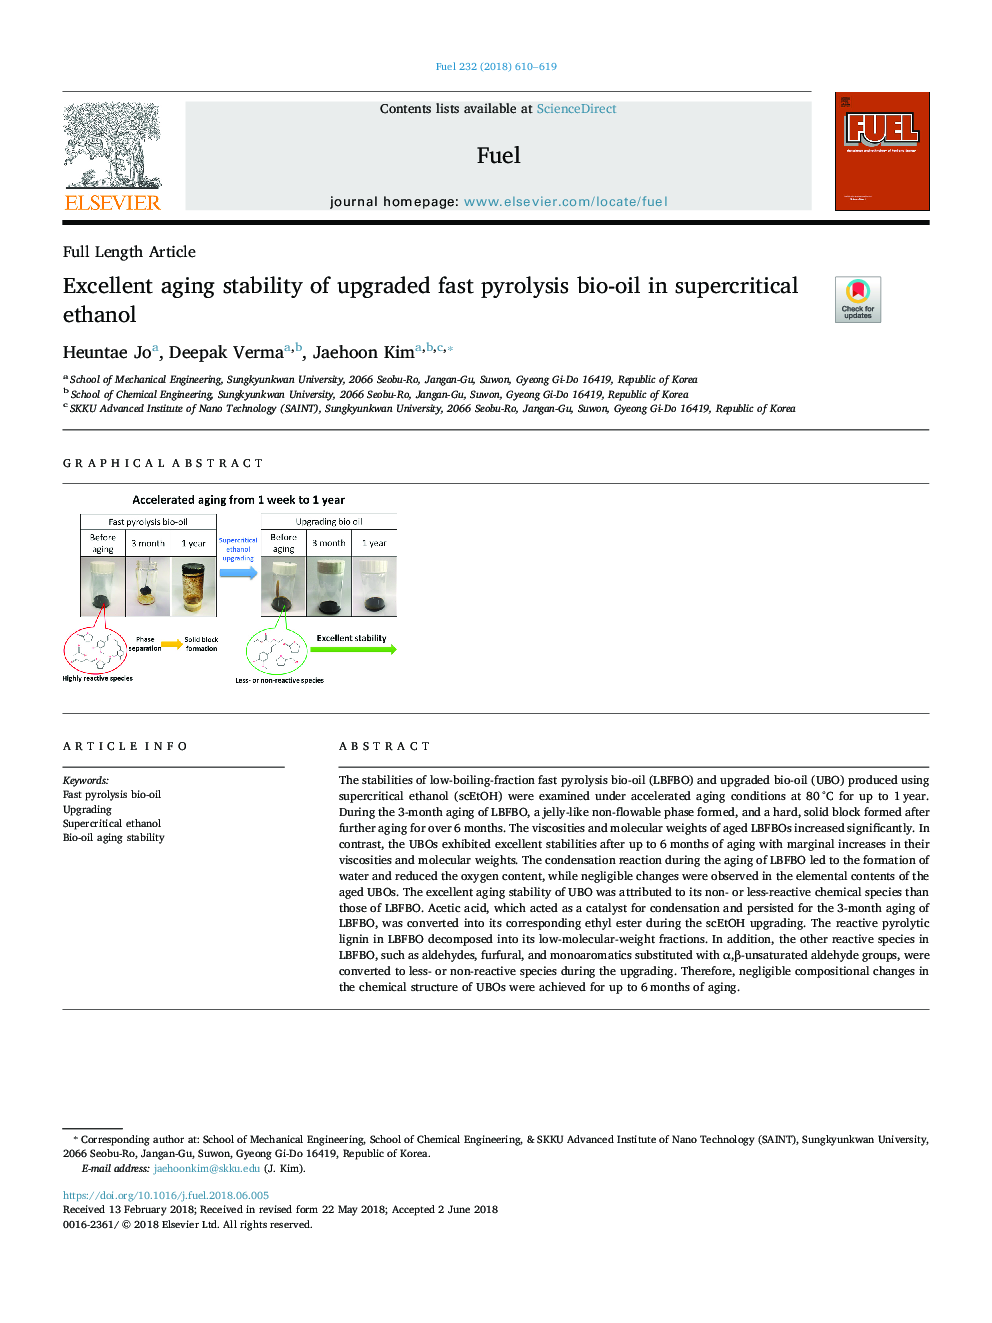 Excellent aging stability of upgraded fast pyrolysis bio-oil in supercritical ethanol